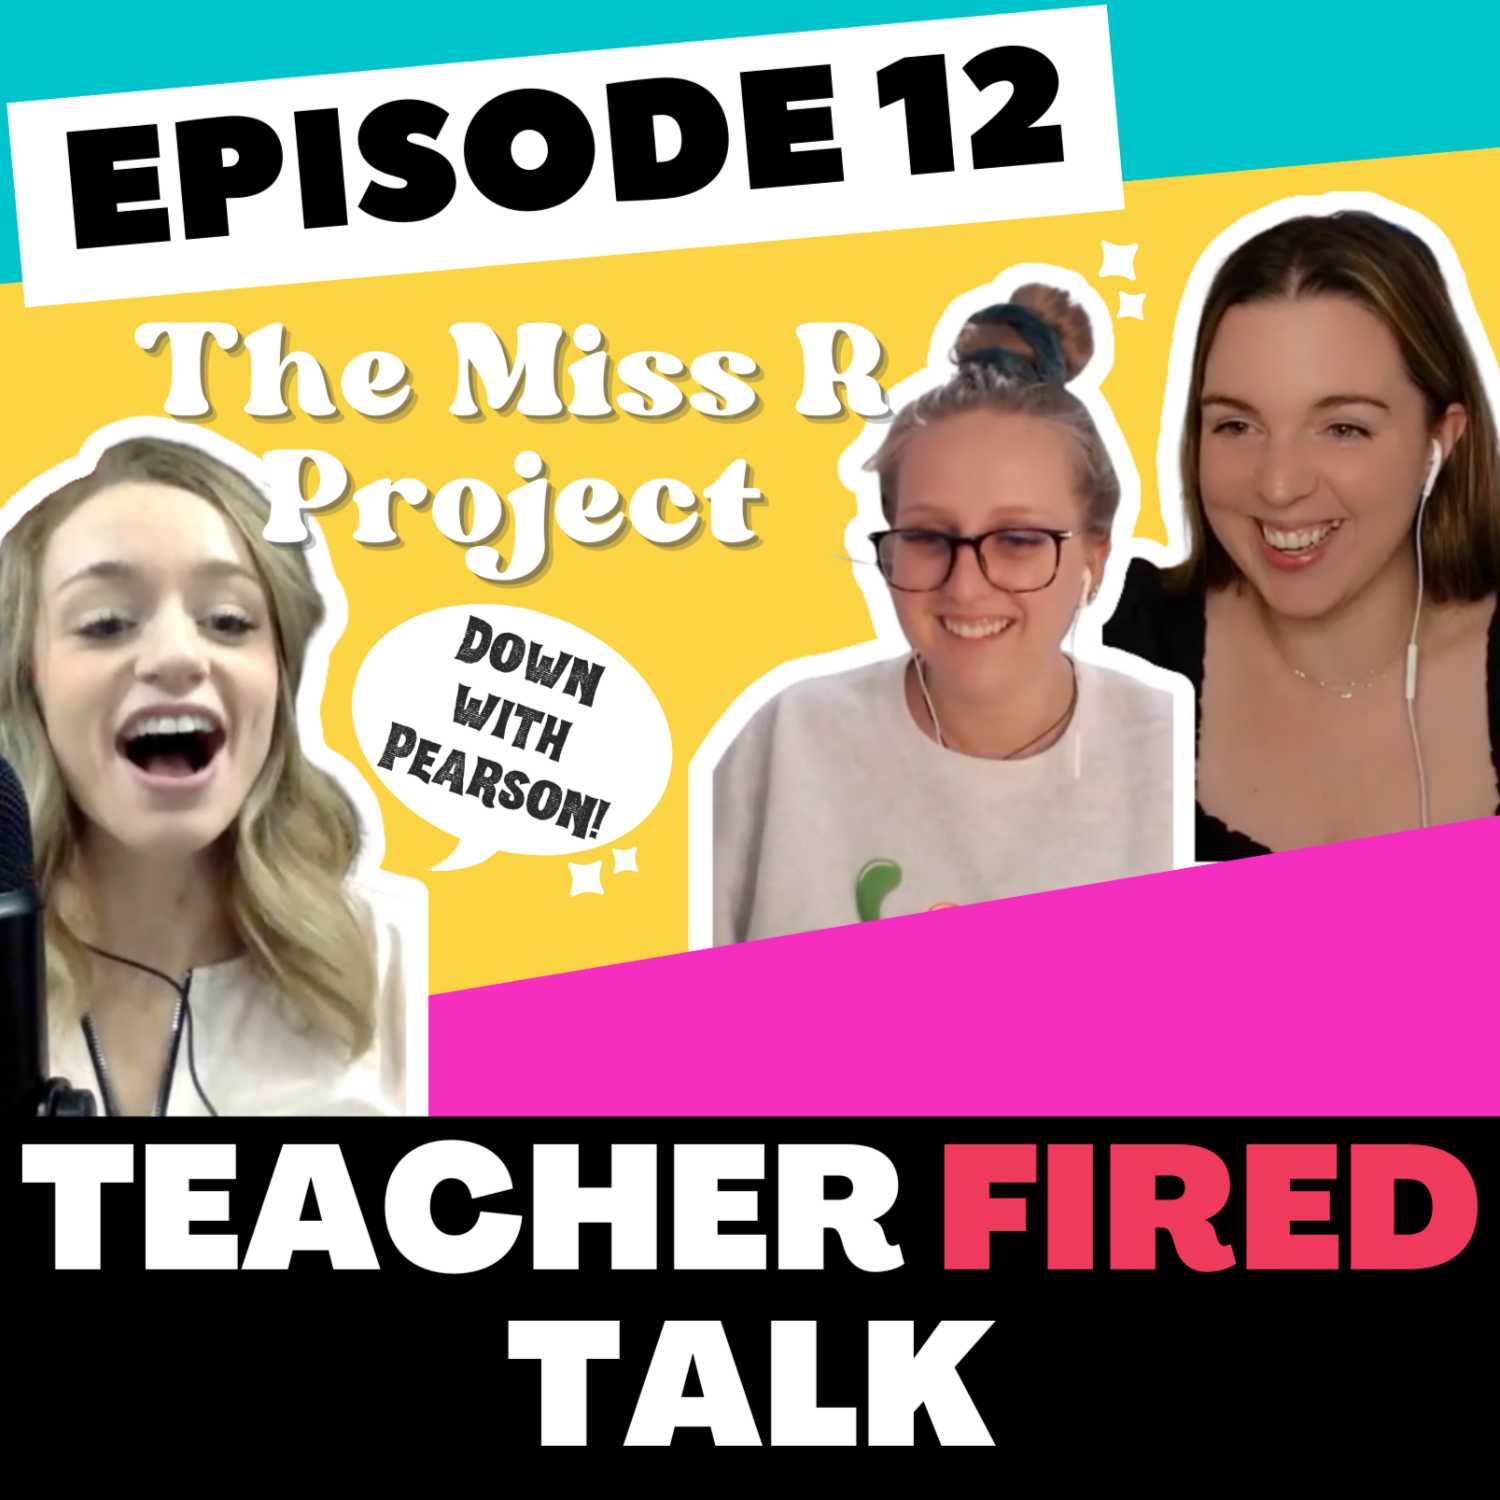 Episode 12: Teacher Fired Talk with The Miss R Project